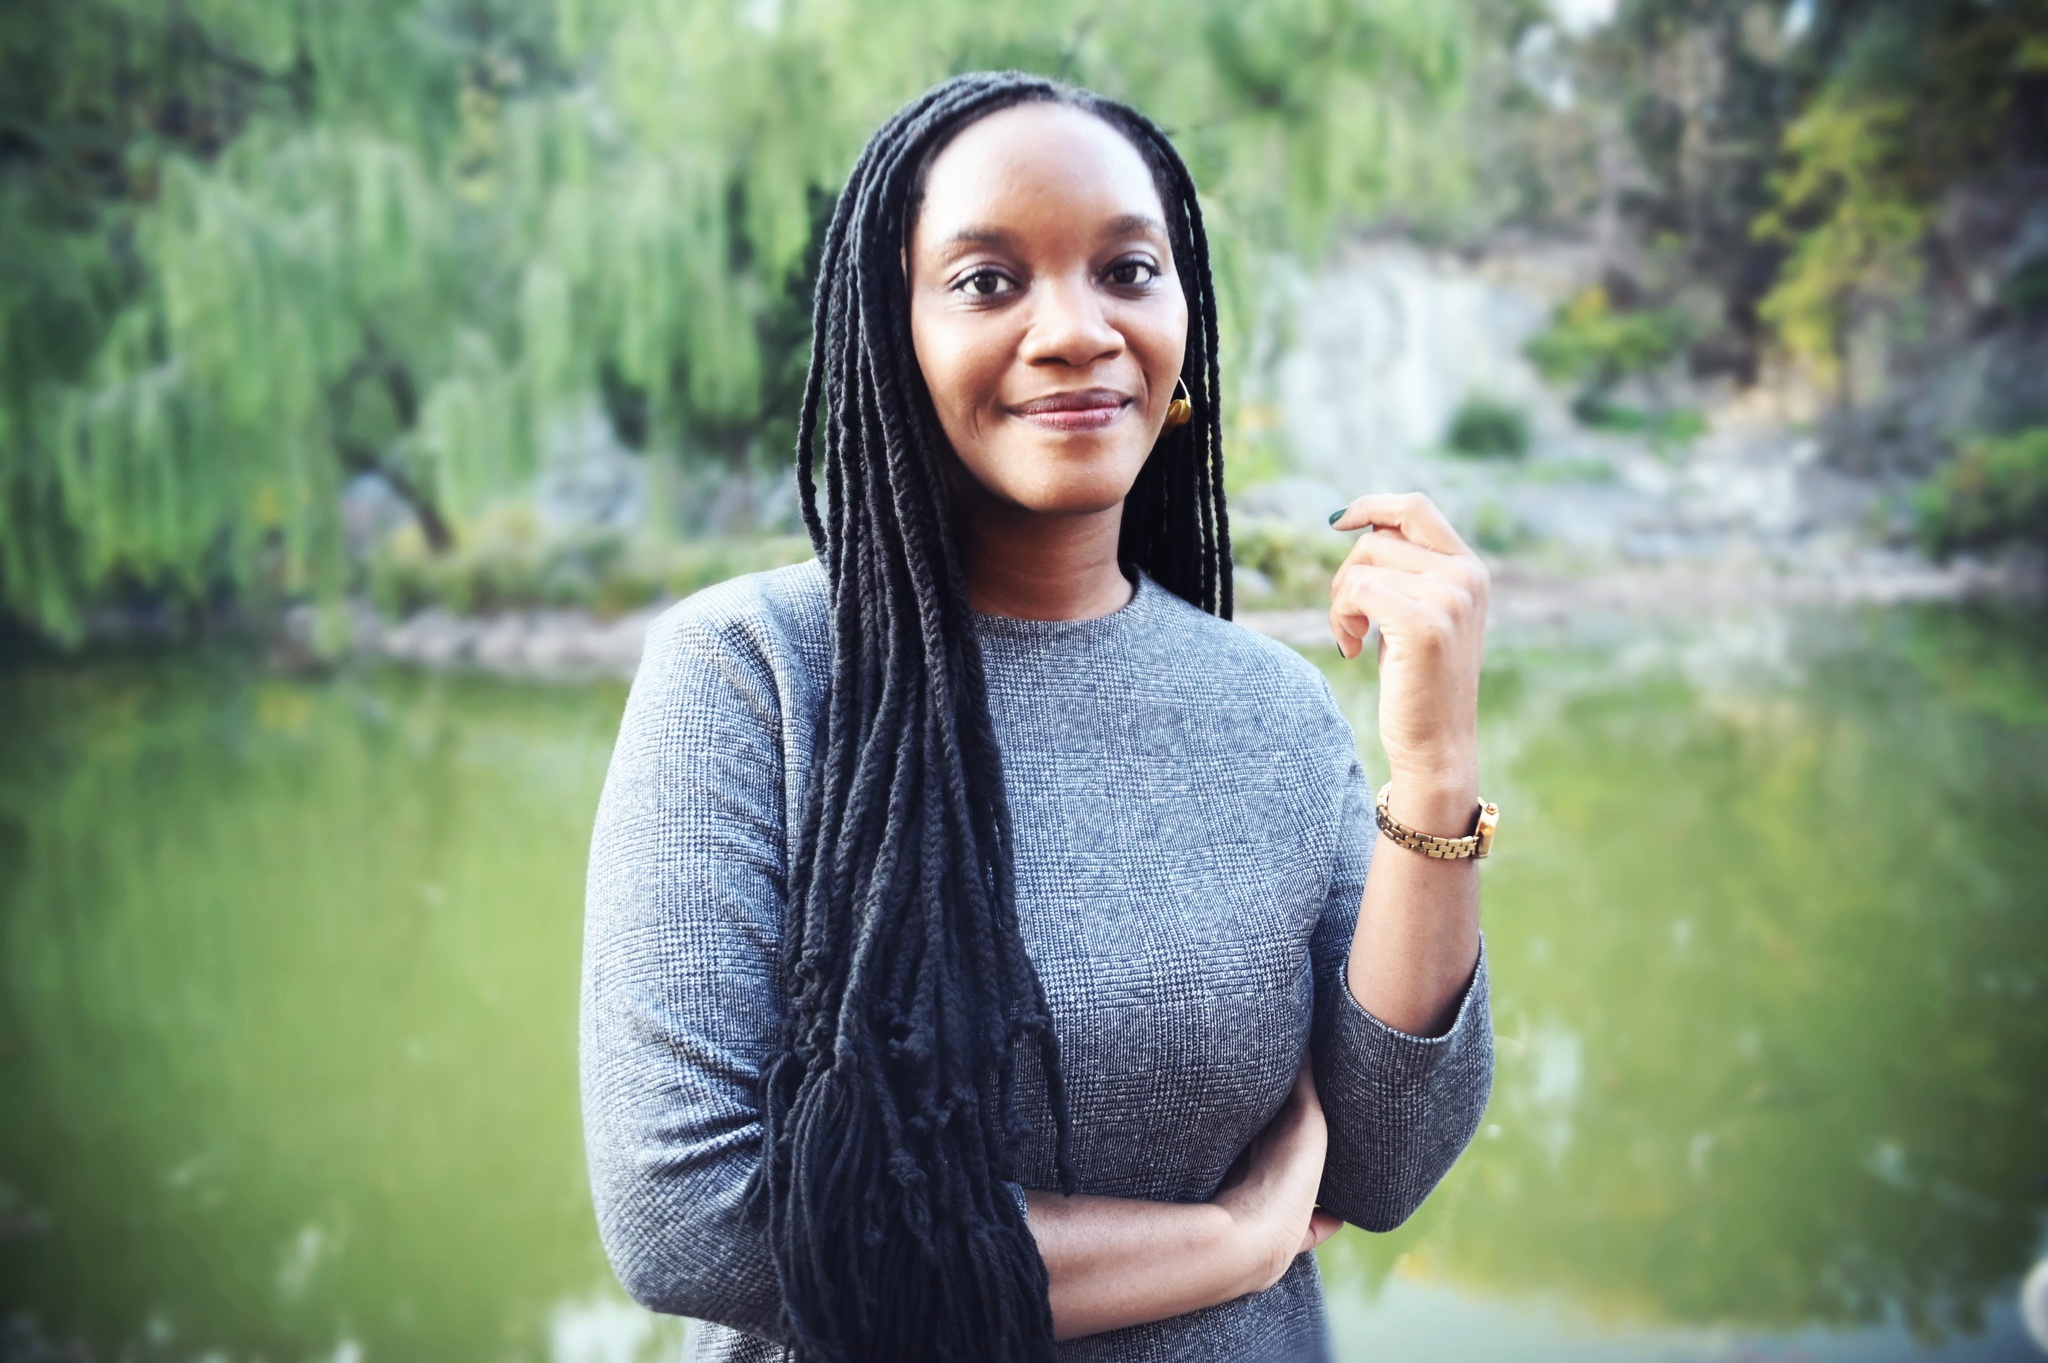 A photo of the artist Ladi'Sasha Jones who poses with a pond in the background. Jones has one hand raised and one crossed across her waist, with long hair falling over her right shoulder. 